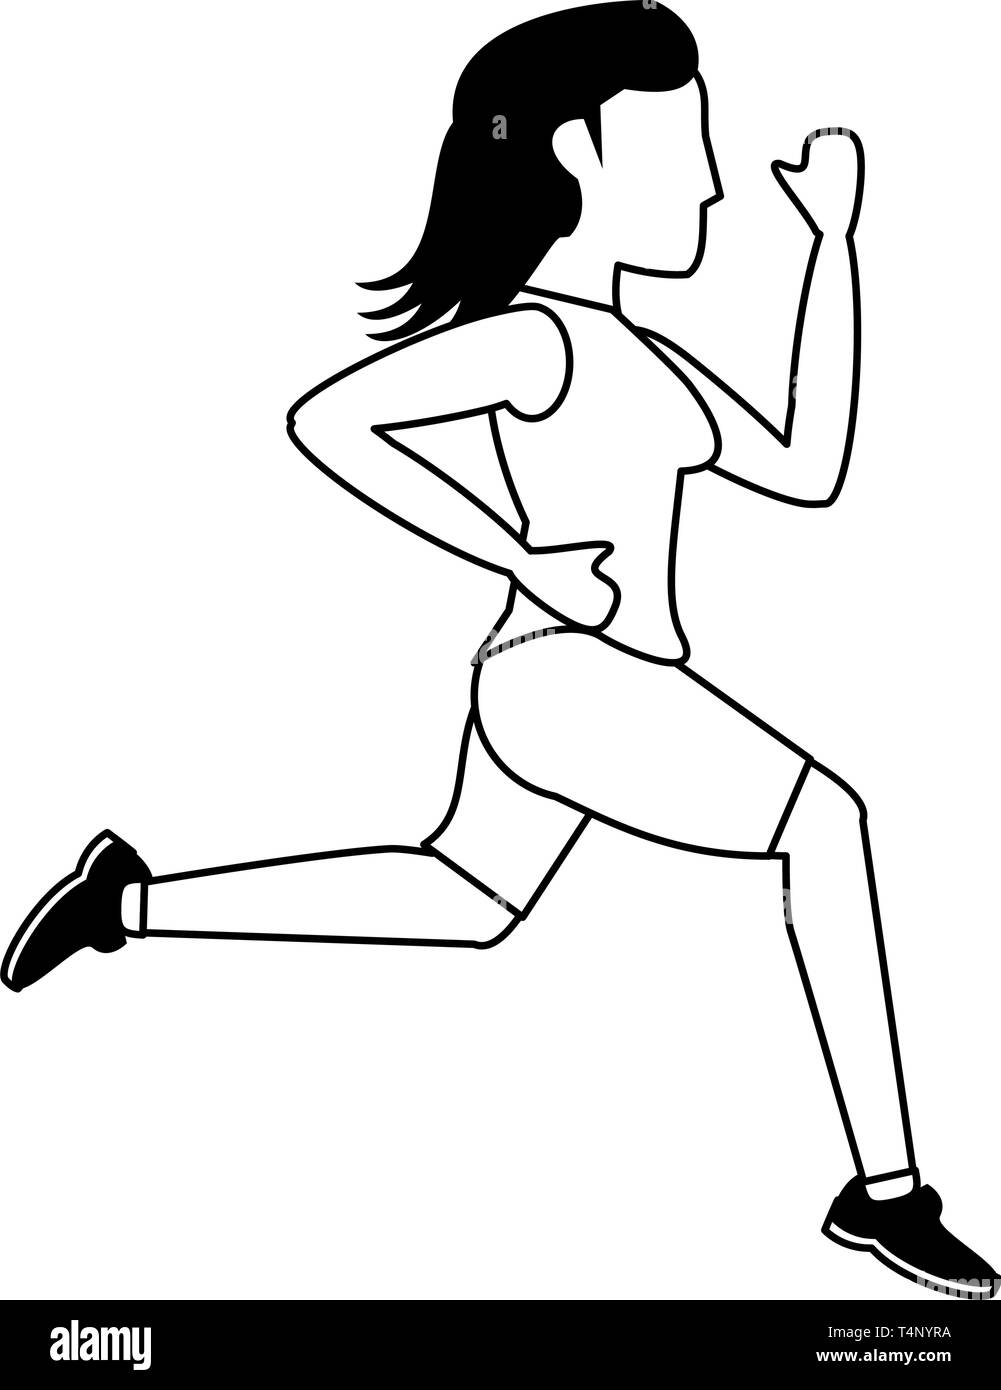 Fitness woman running sideview in black and white Stock Vector Image ...